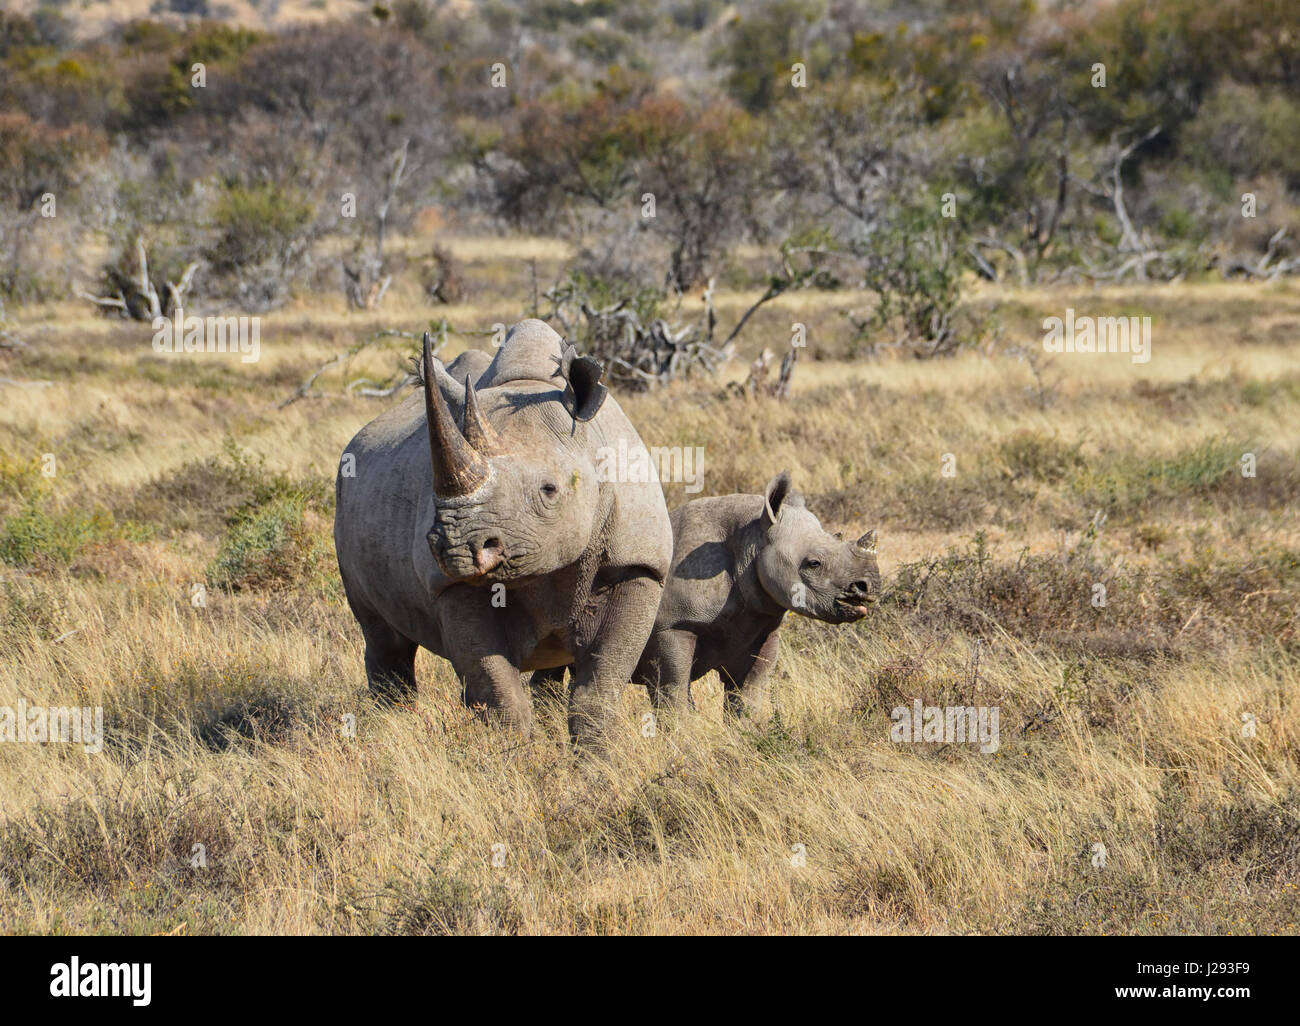 A Black Rhino mother and her 6 month olf calf in Southern African savanna Stock Photo